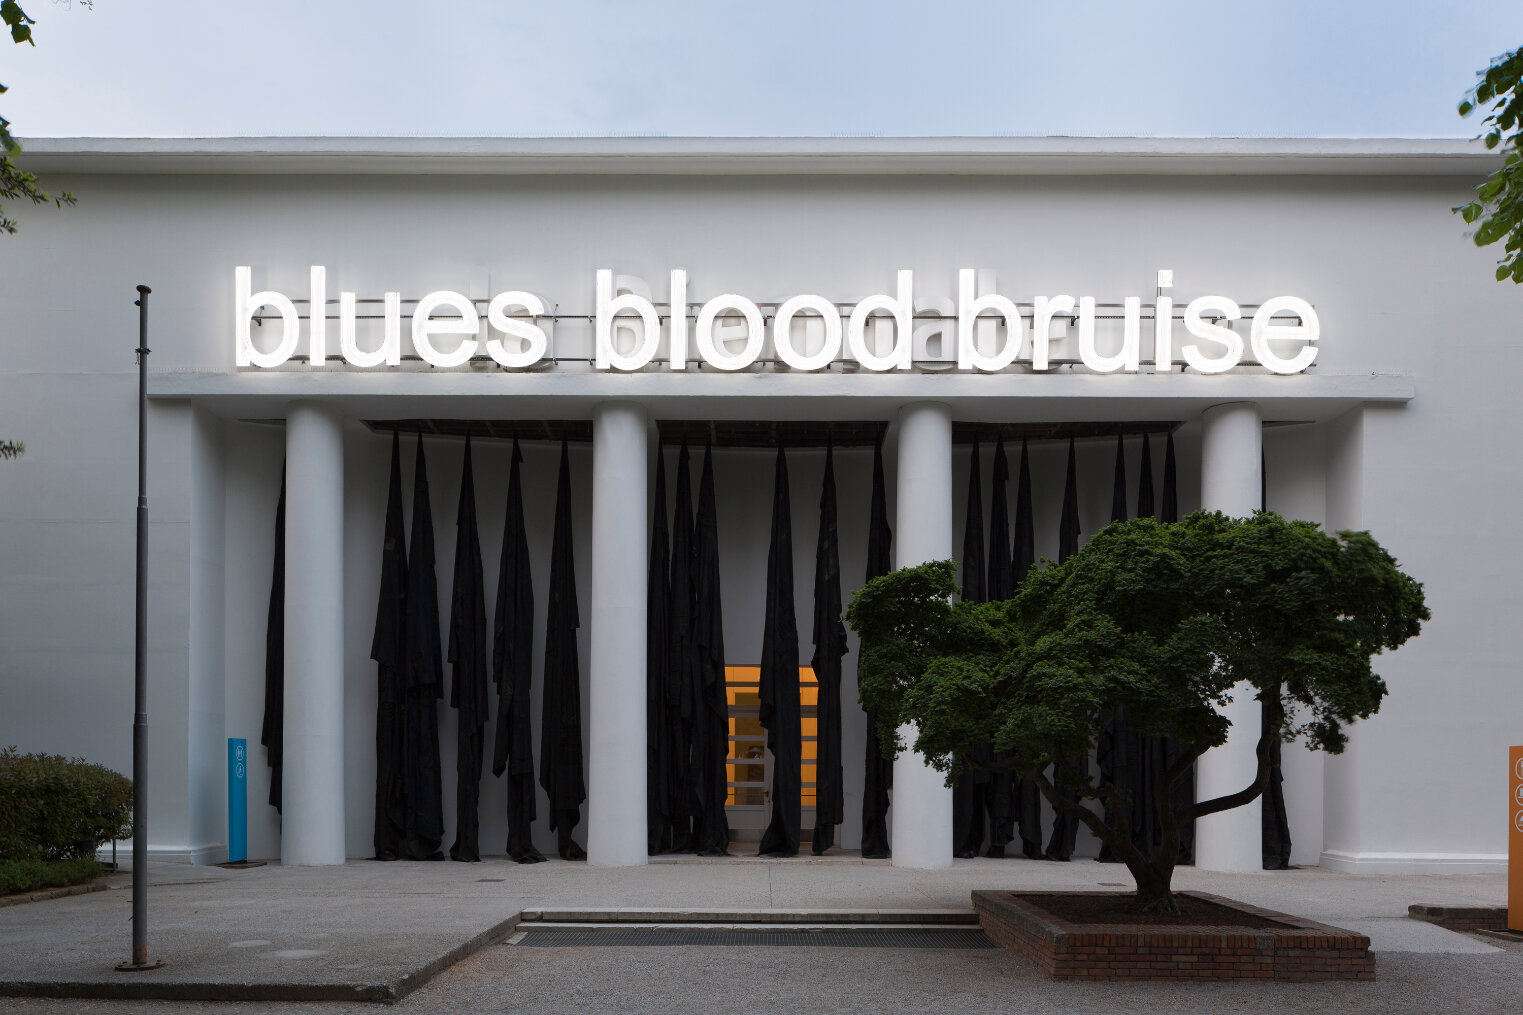  Glenn Ligon  A Small Band , 2015   Neon, paint, and metal support, Three components; “blues”: 74 x 231 in   (188 x 586.7 cm); “blood”: 74 ¾   x 231 1/2 in (189.9 x 588 cm); “bruise”:   74 3/4 x 264 3/4 in (189.9 x 672.5 cm);   overall approx. 74 3/4